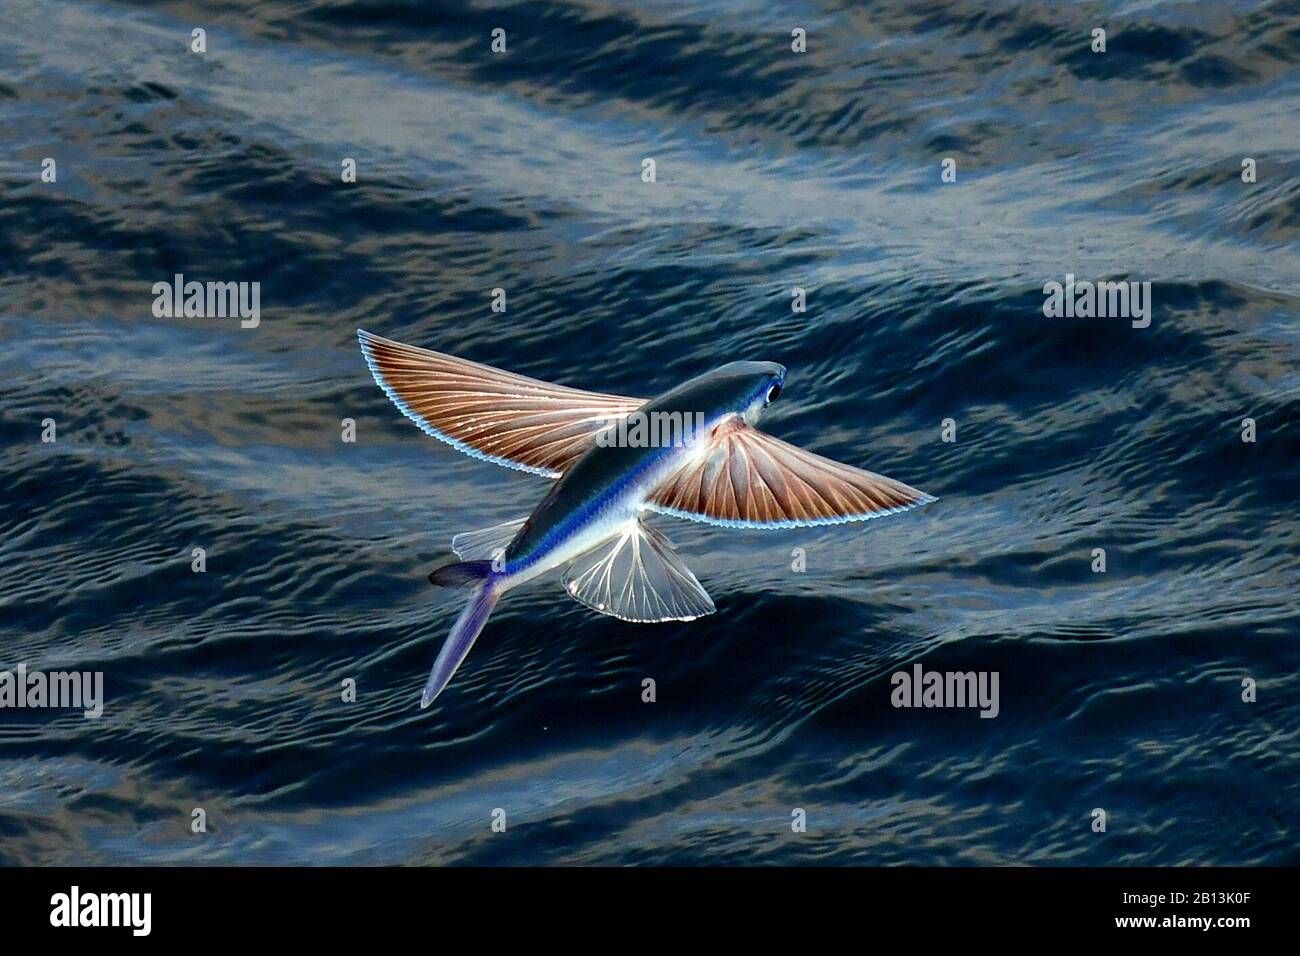 Flying fish species taking off from the ocean surface, Atlantic Ocean Stock Photo